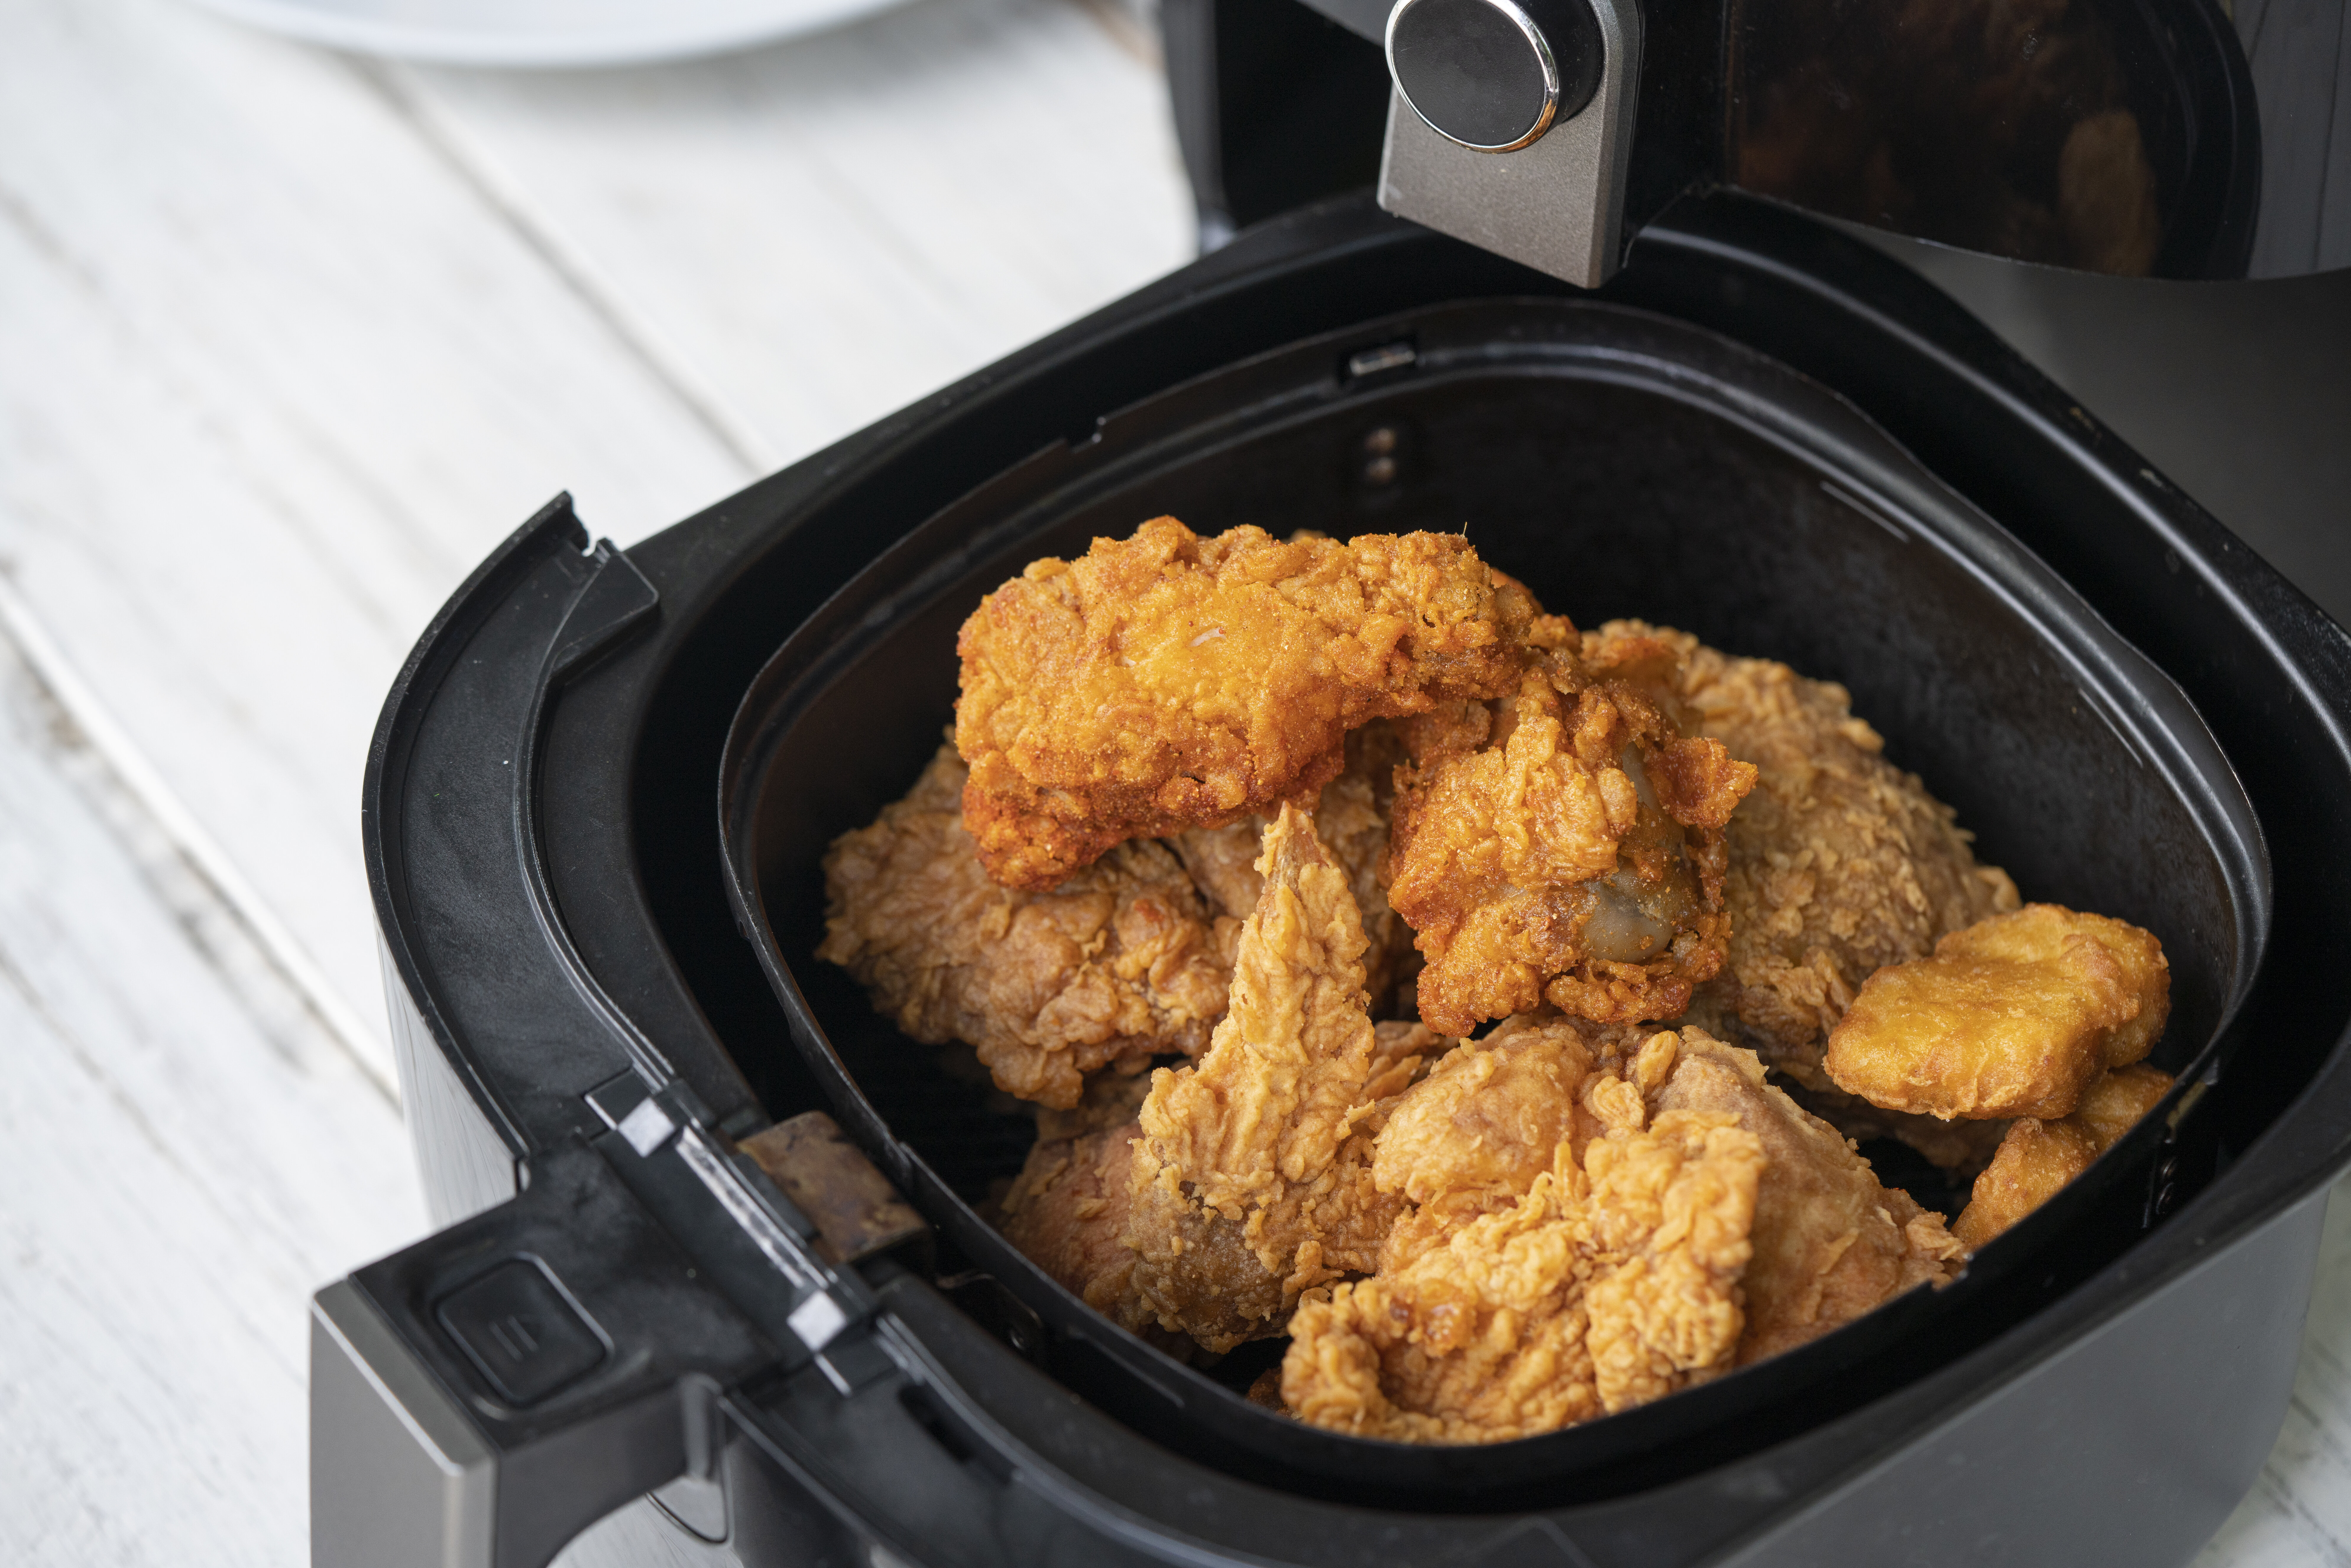 Air Fryer Cooking Time Chart - Piping Pot Curry